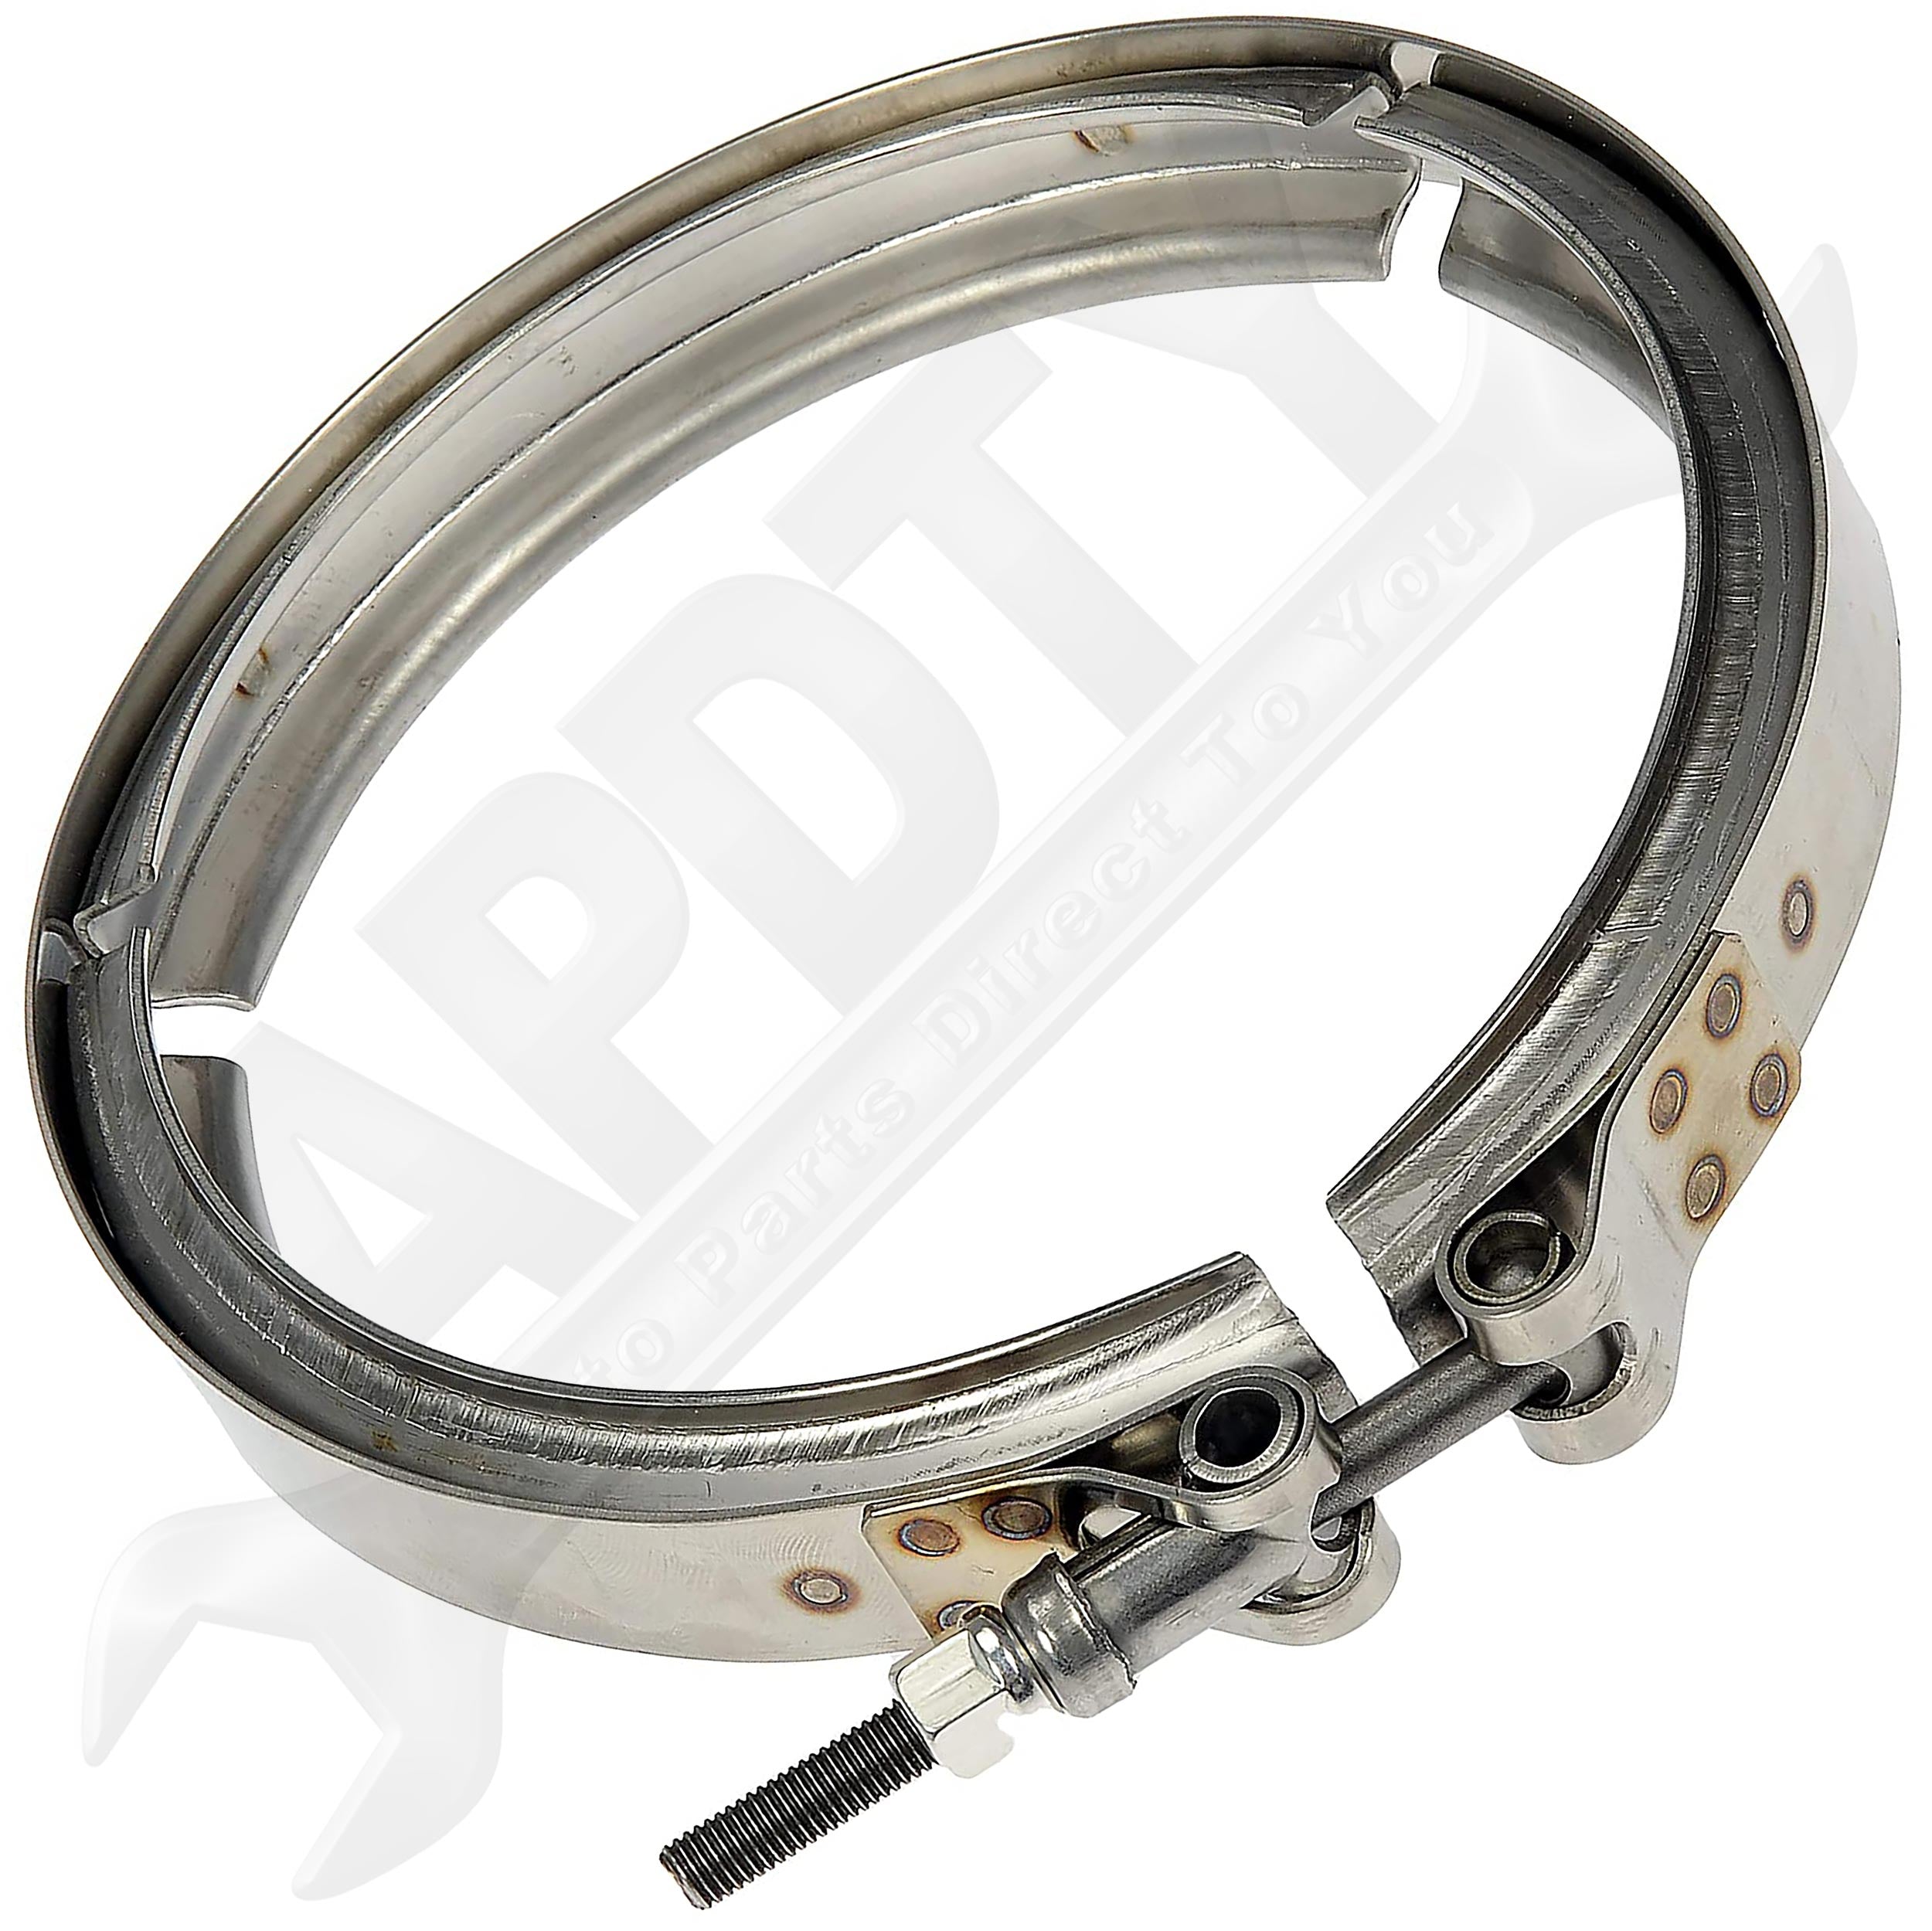 APDTY, APDTY 142098 Exhaust V-Band Clamp Replaces 21021850